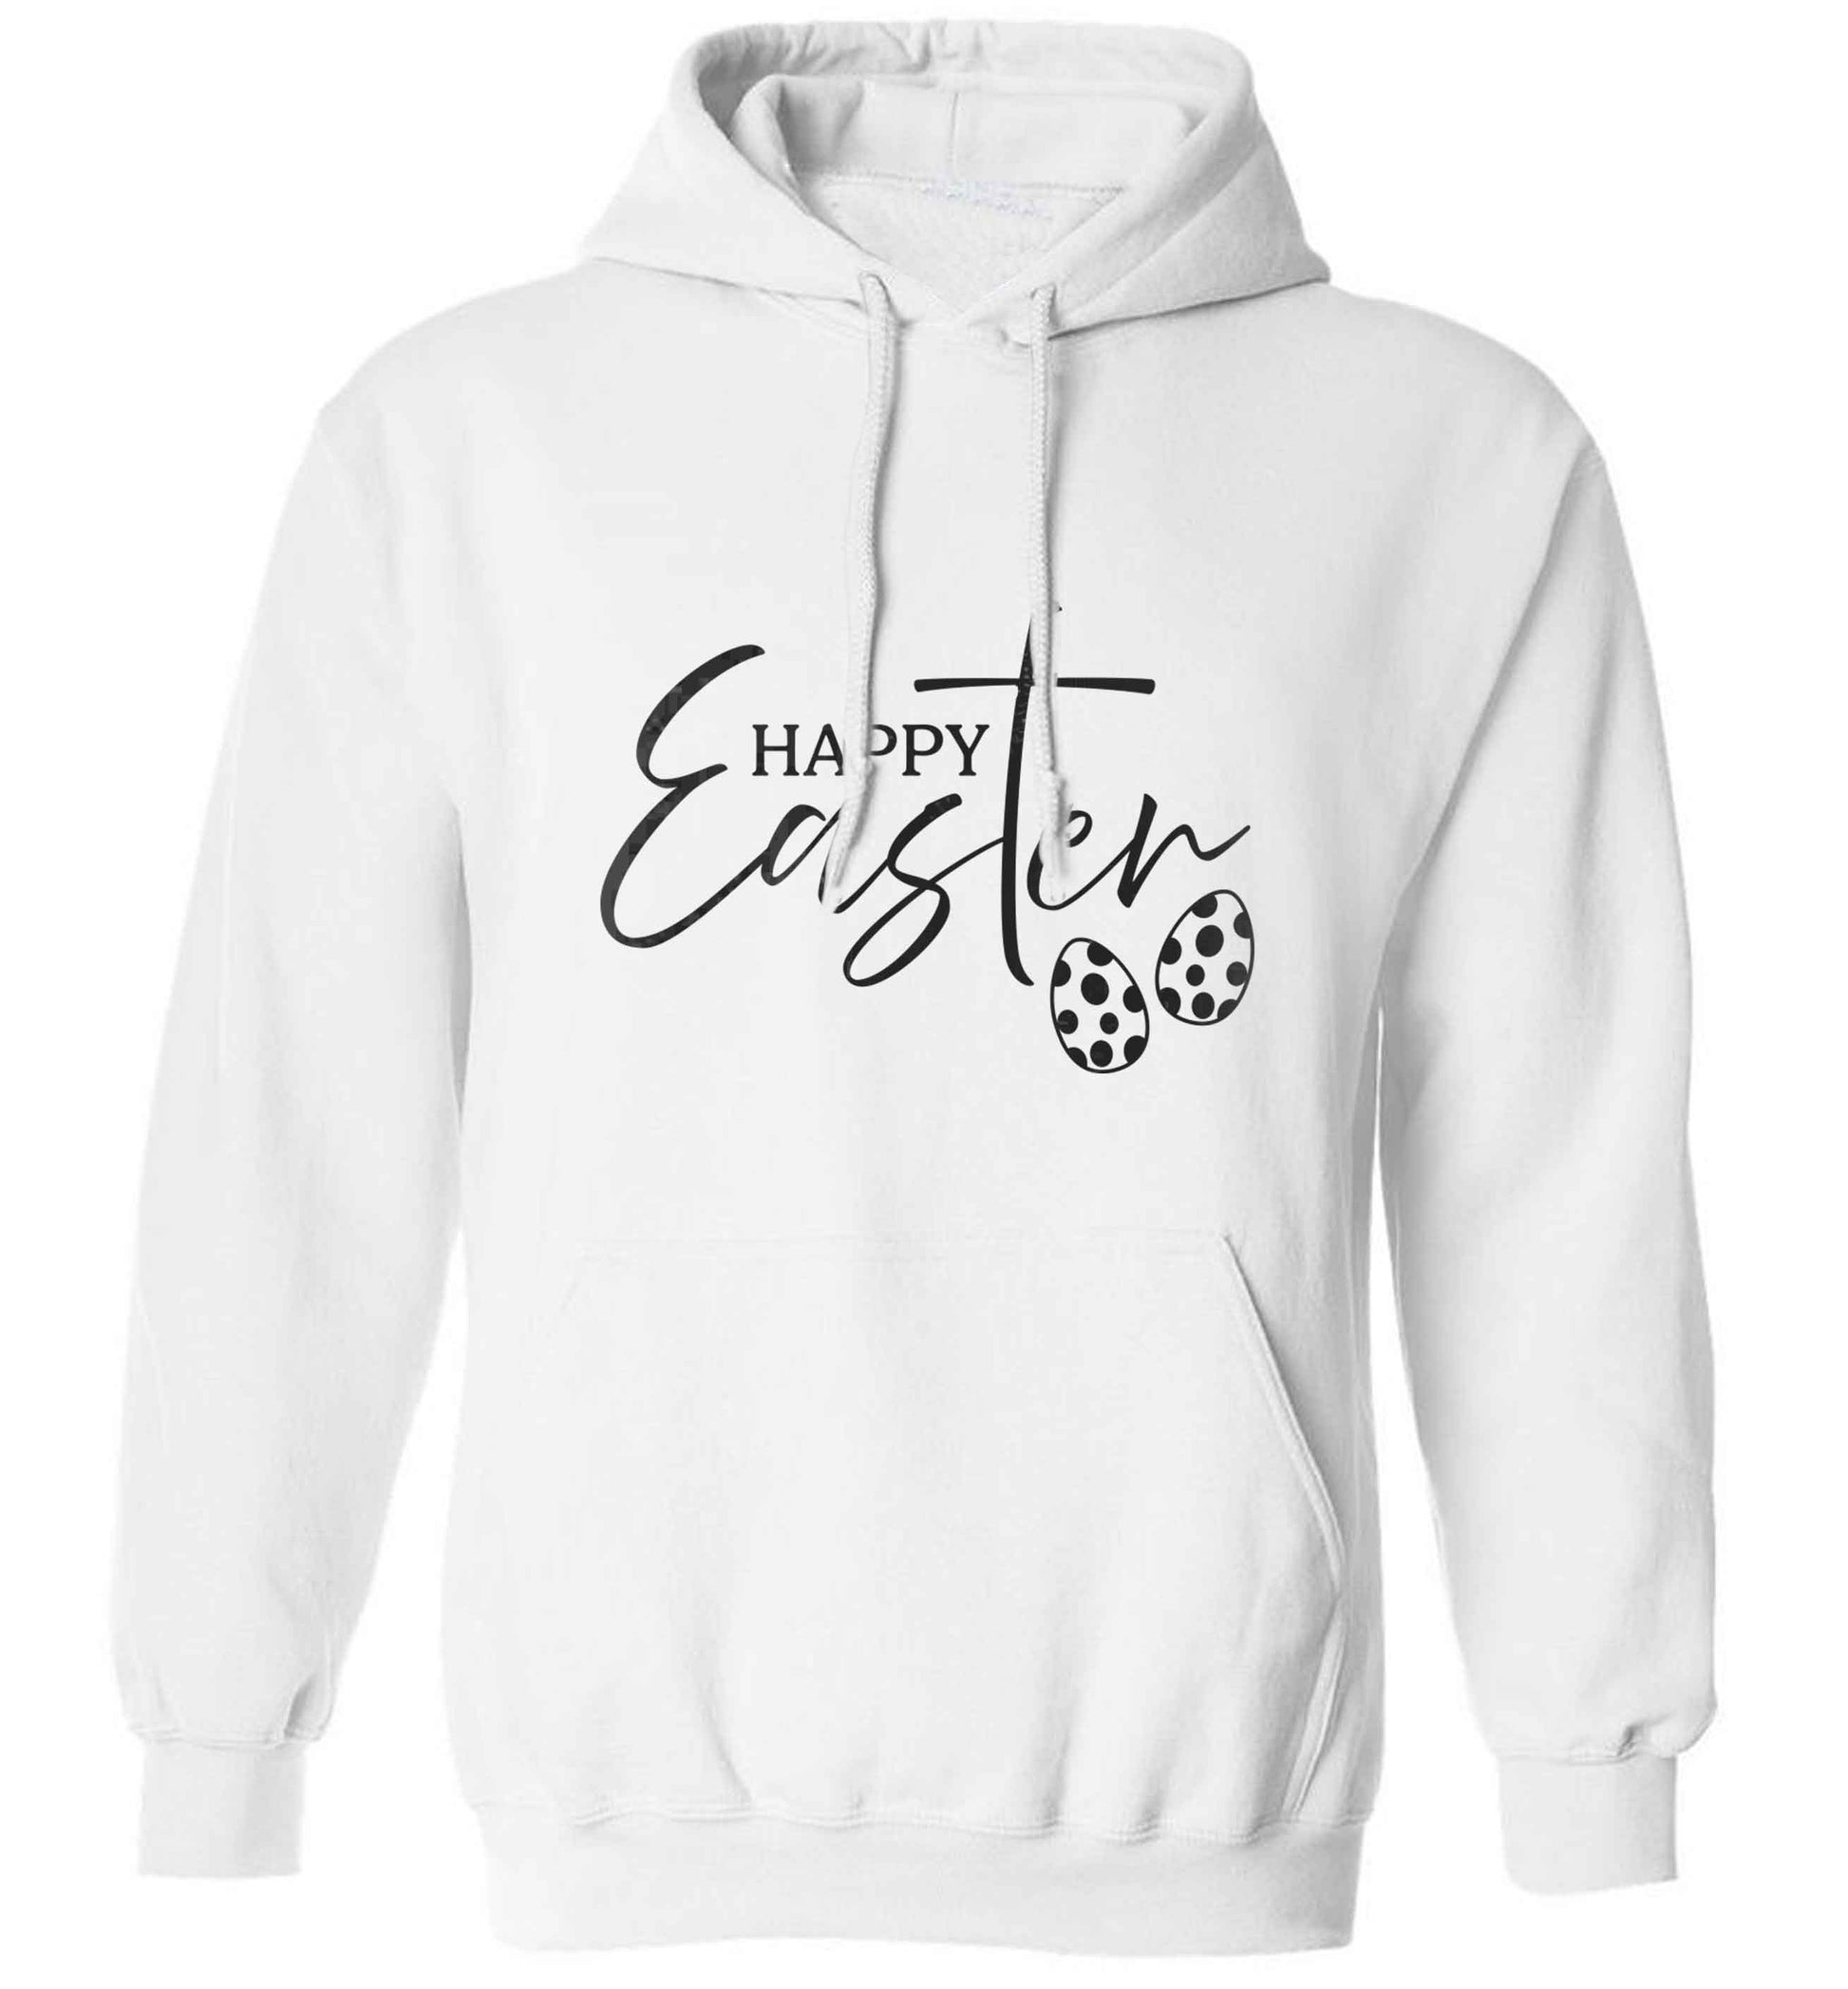 Happy Easter adults unisex white hoodie 2XL